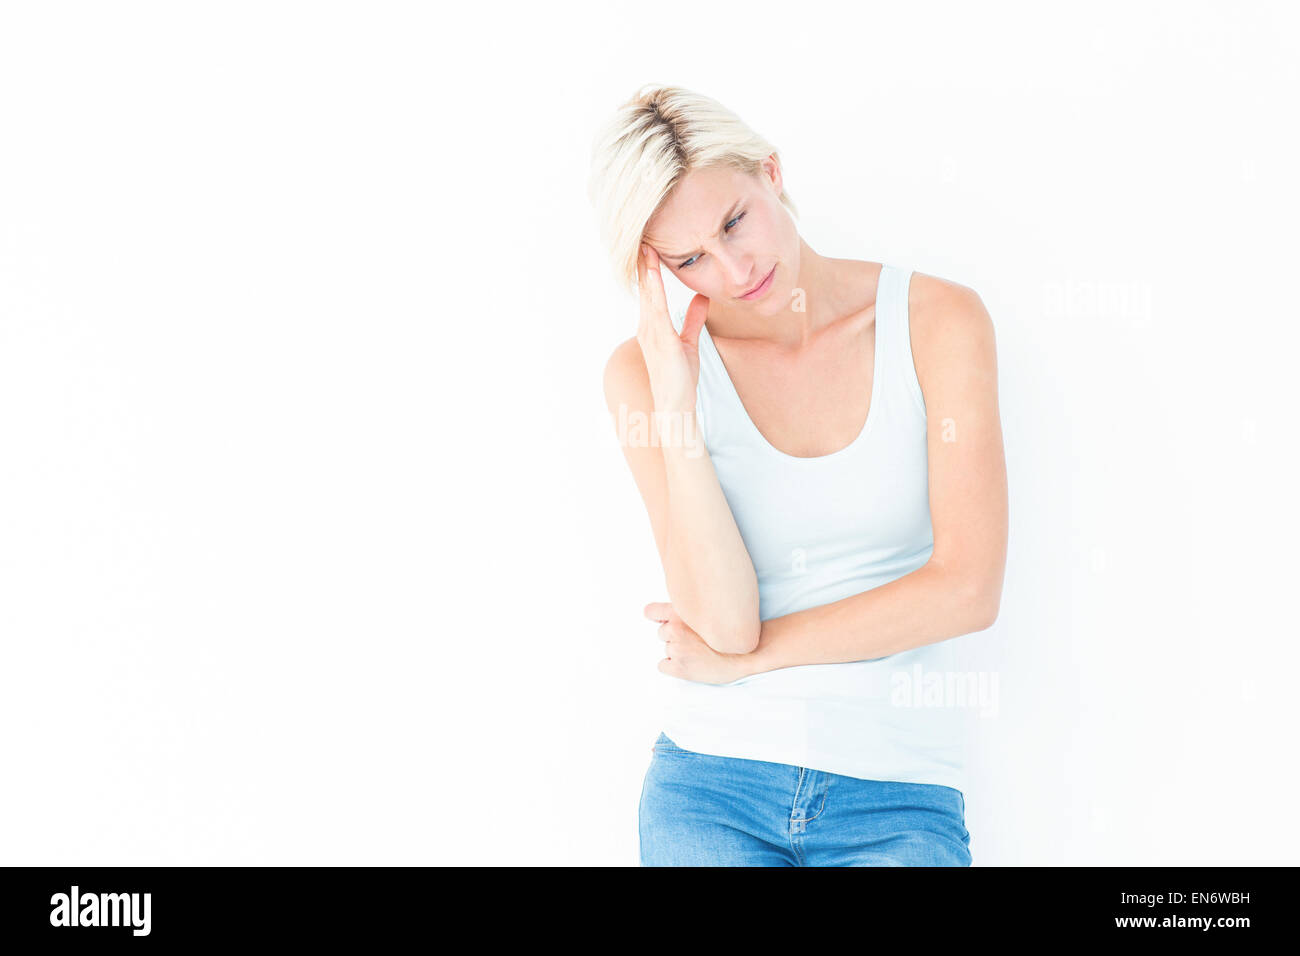 Depressed blonde woman with hand on temple Stock Photo